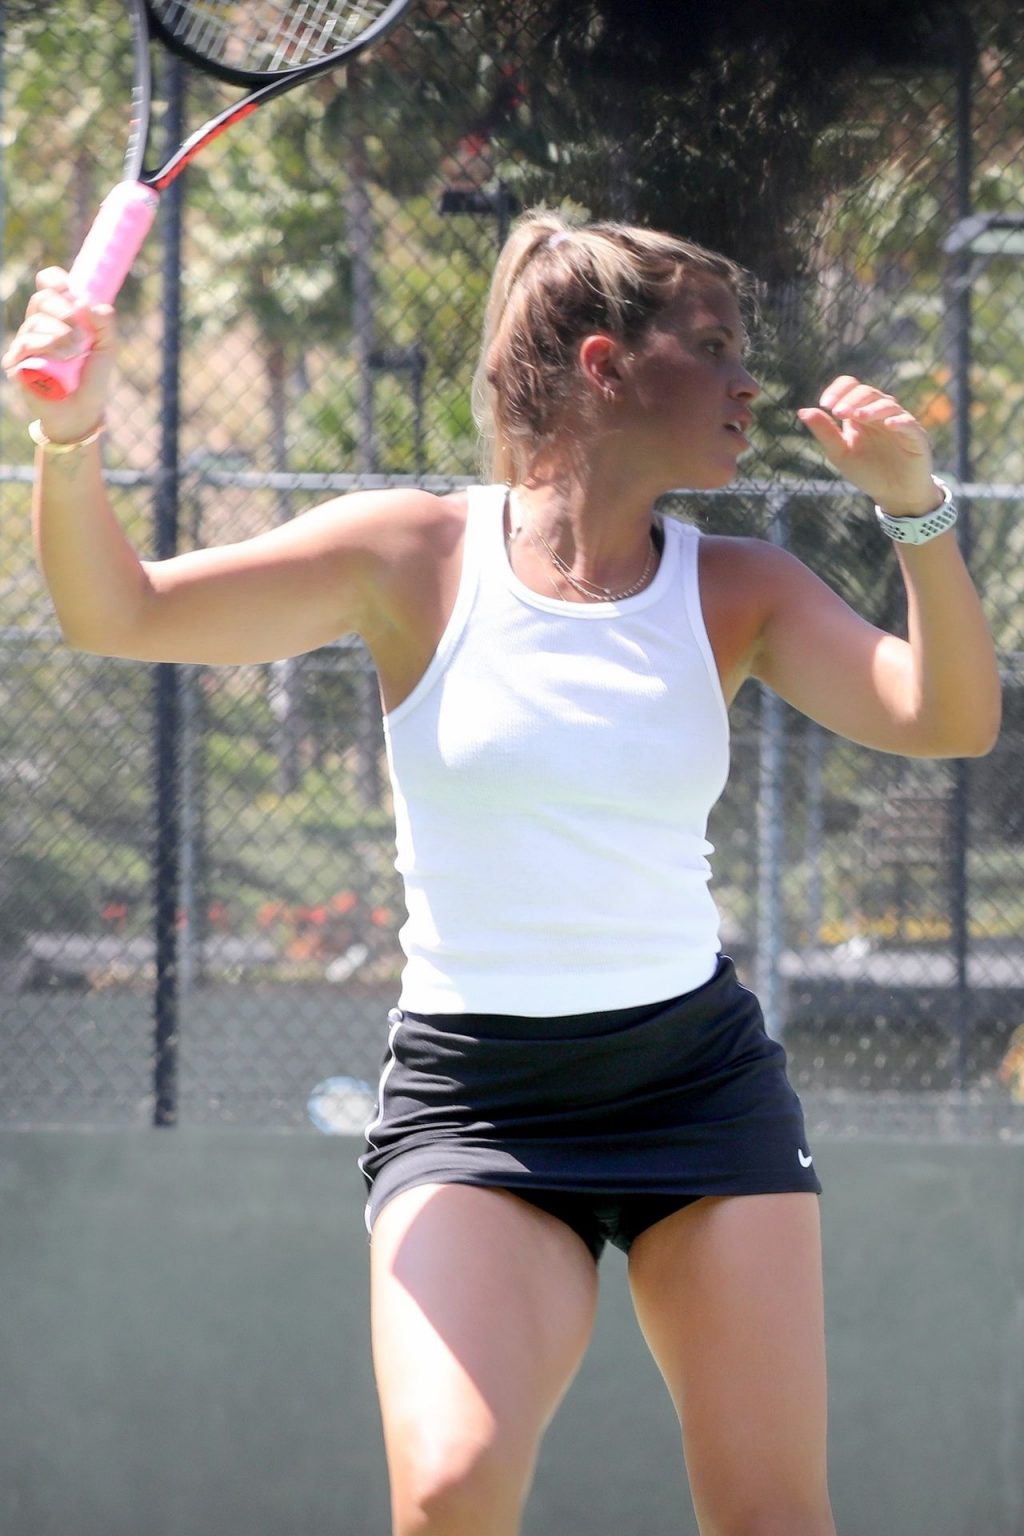 Sofia Richie Showcases Her Sporting Style During a Game of Tennis with Friends (20 Photos)